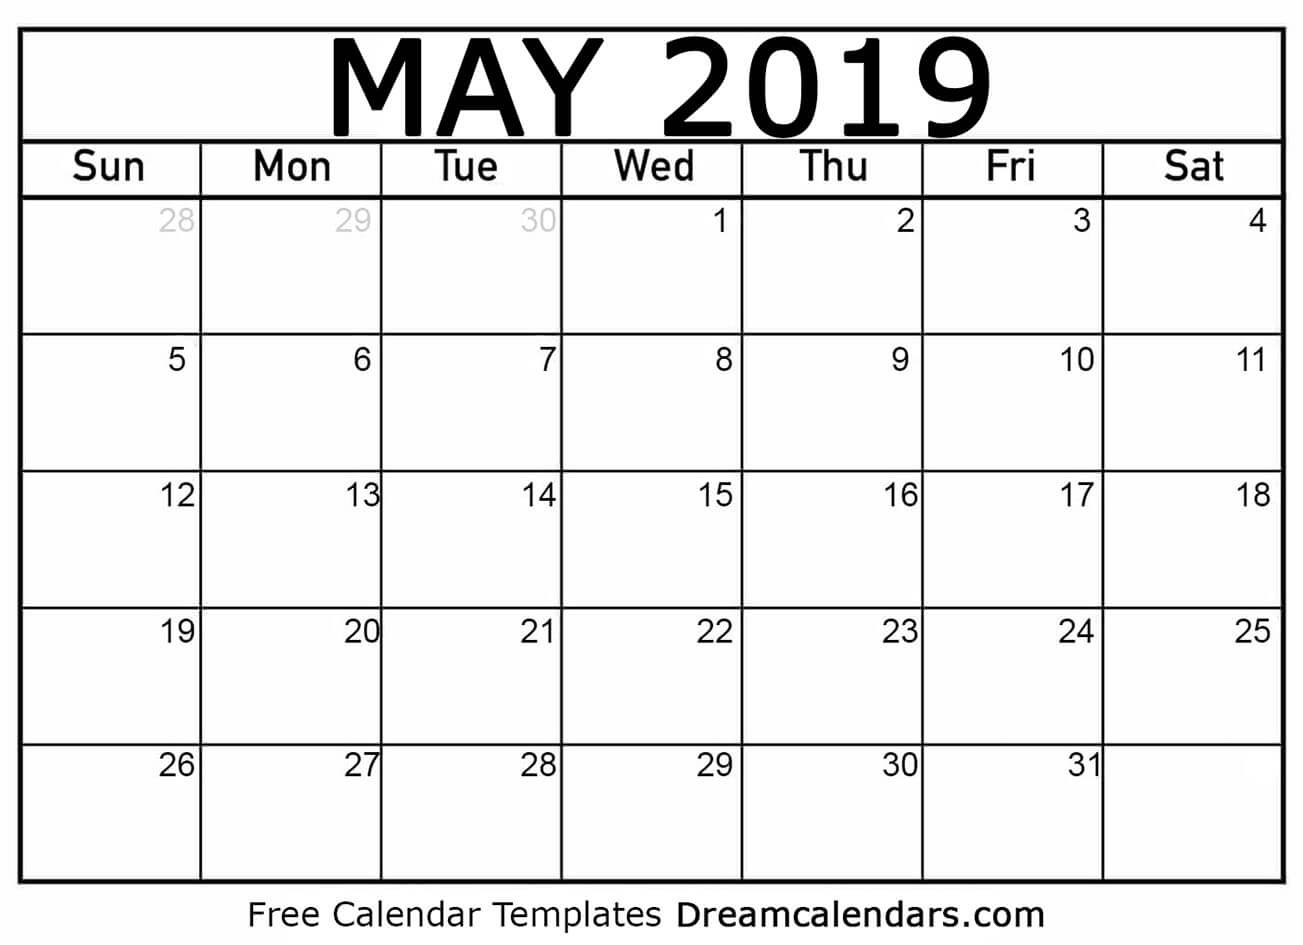 how-to-get-a-printed-or-printable-calendar-for-may-2019-quora